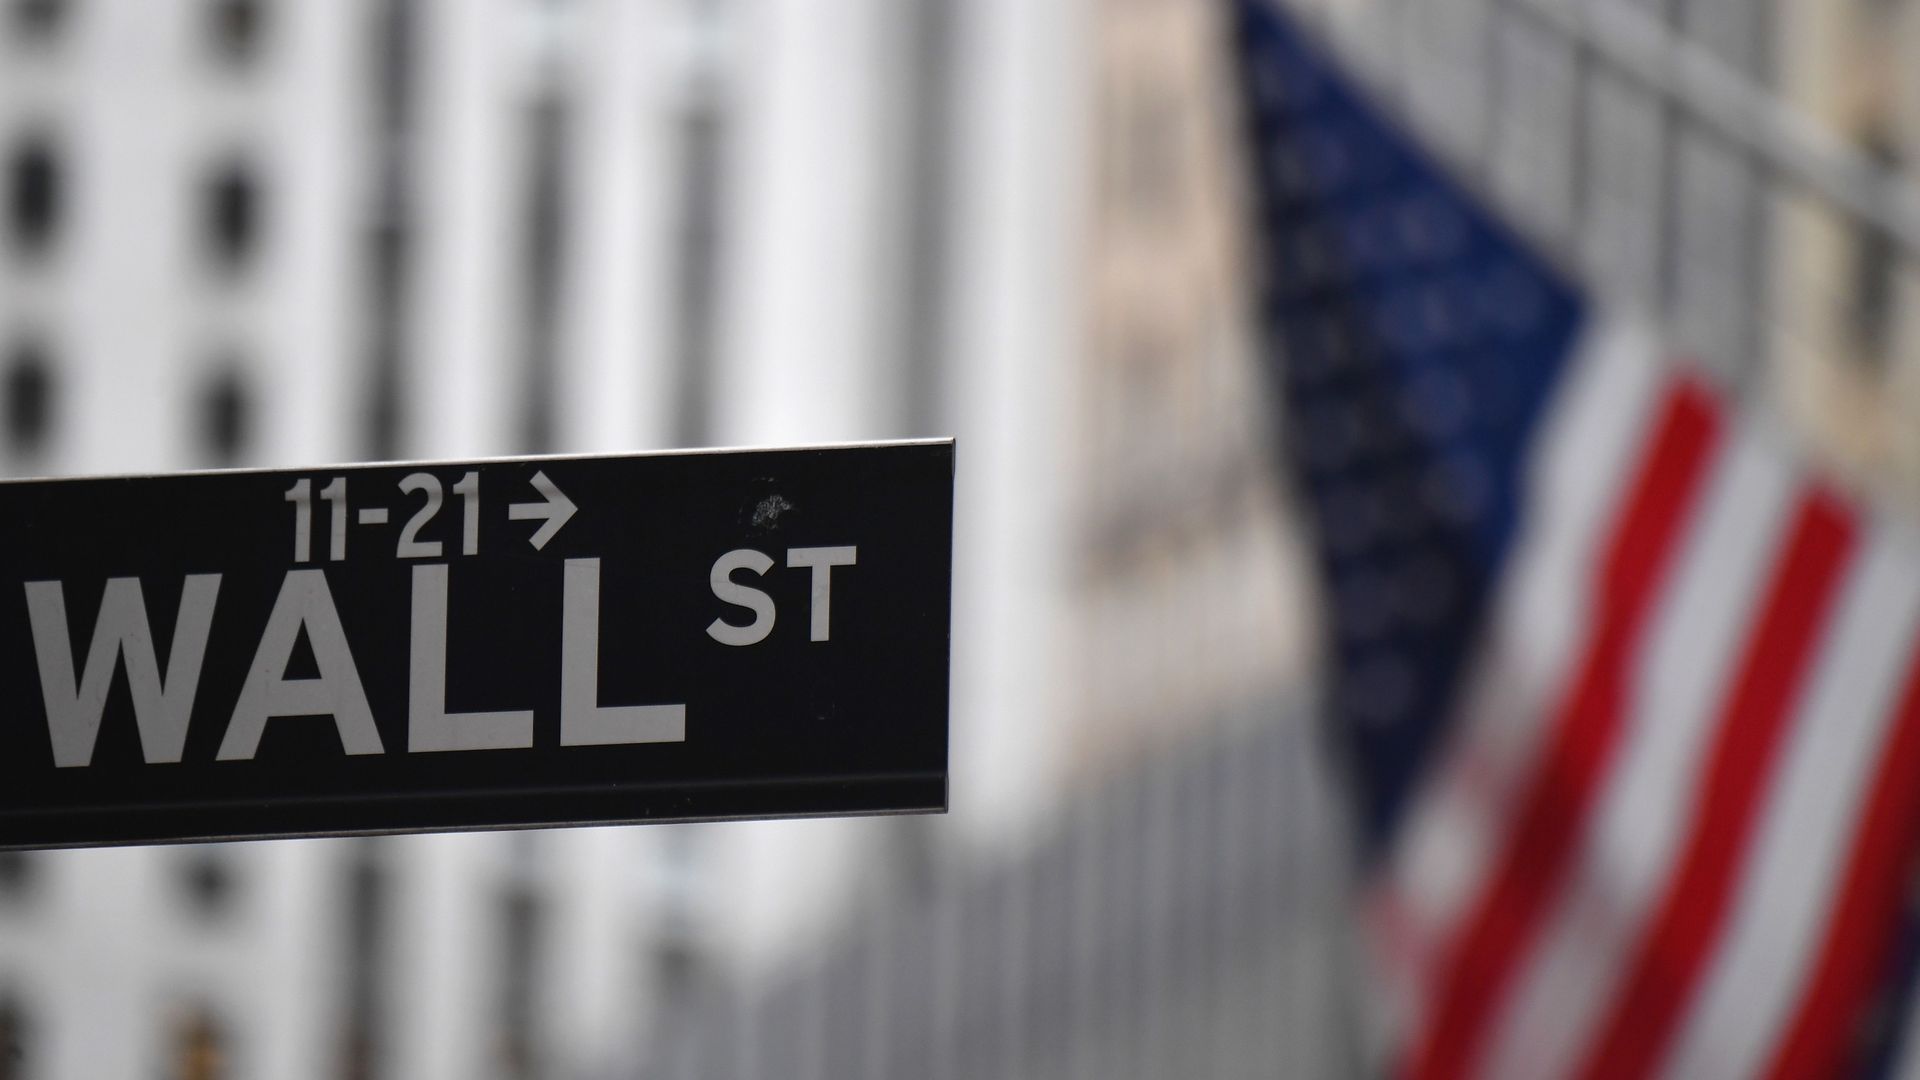 The New York Stock Exchange (NYSE) is pictured on August 31, 2020 at Wall Street in New York Cit